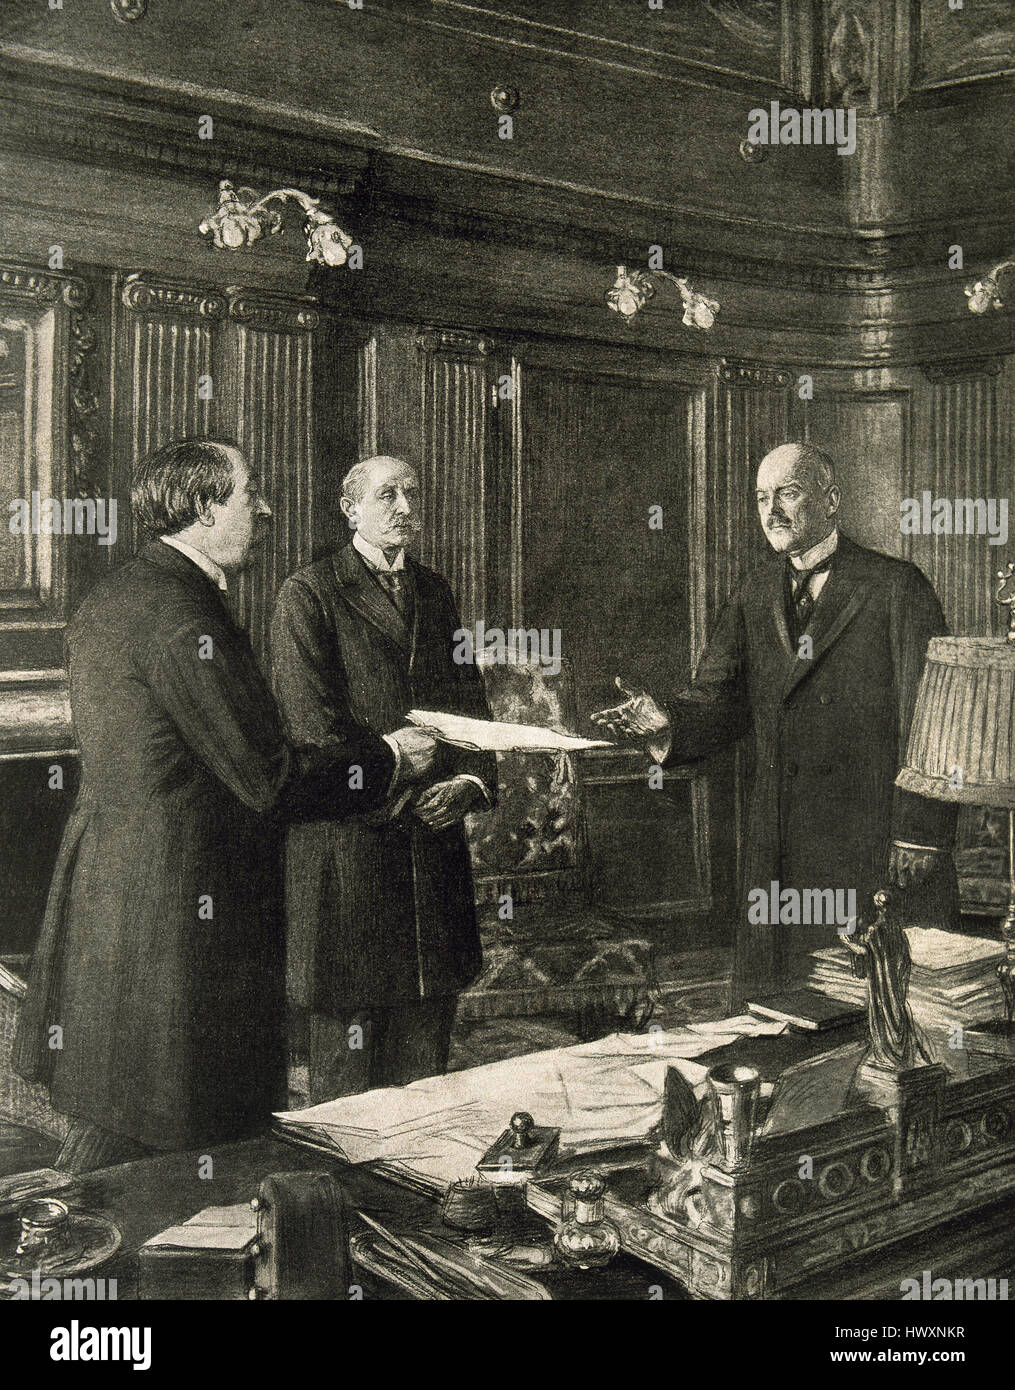 The President of United States, Thomas Woodrow Wilson (1856-1924)  meets with the representatives of the Allied forces. Engraving. 'La Ilustracion Francesa', 1917. Stock Photo